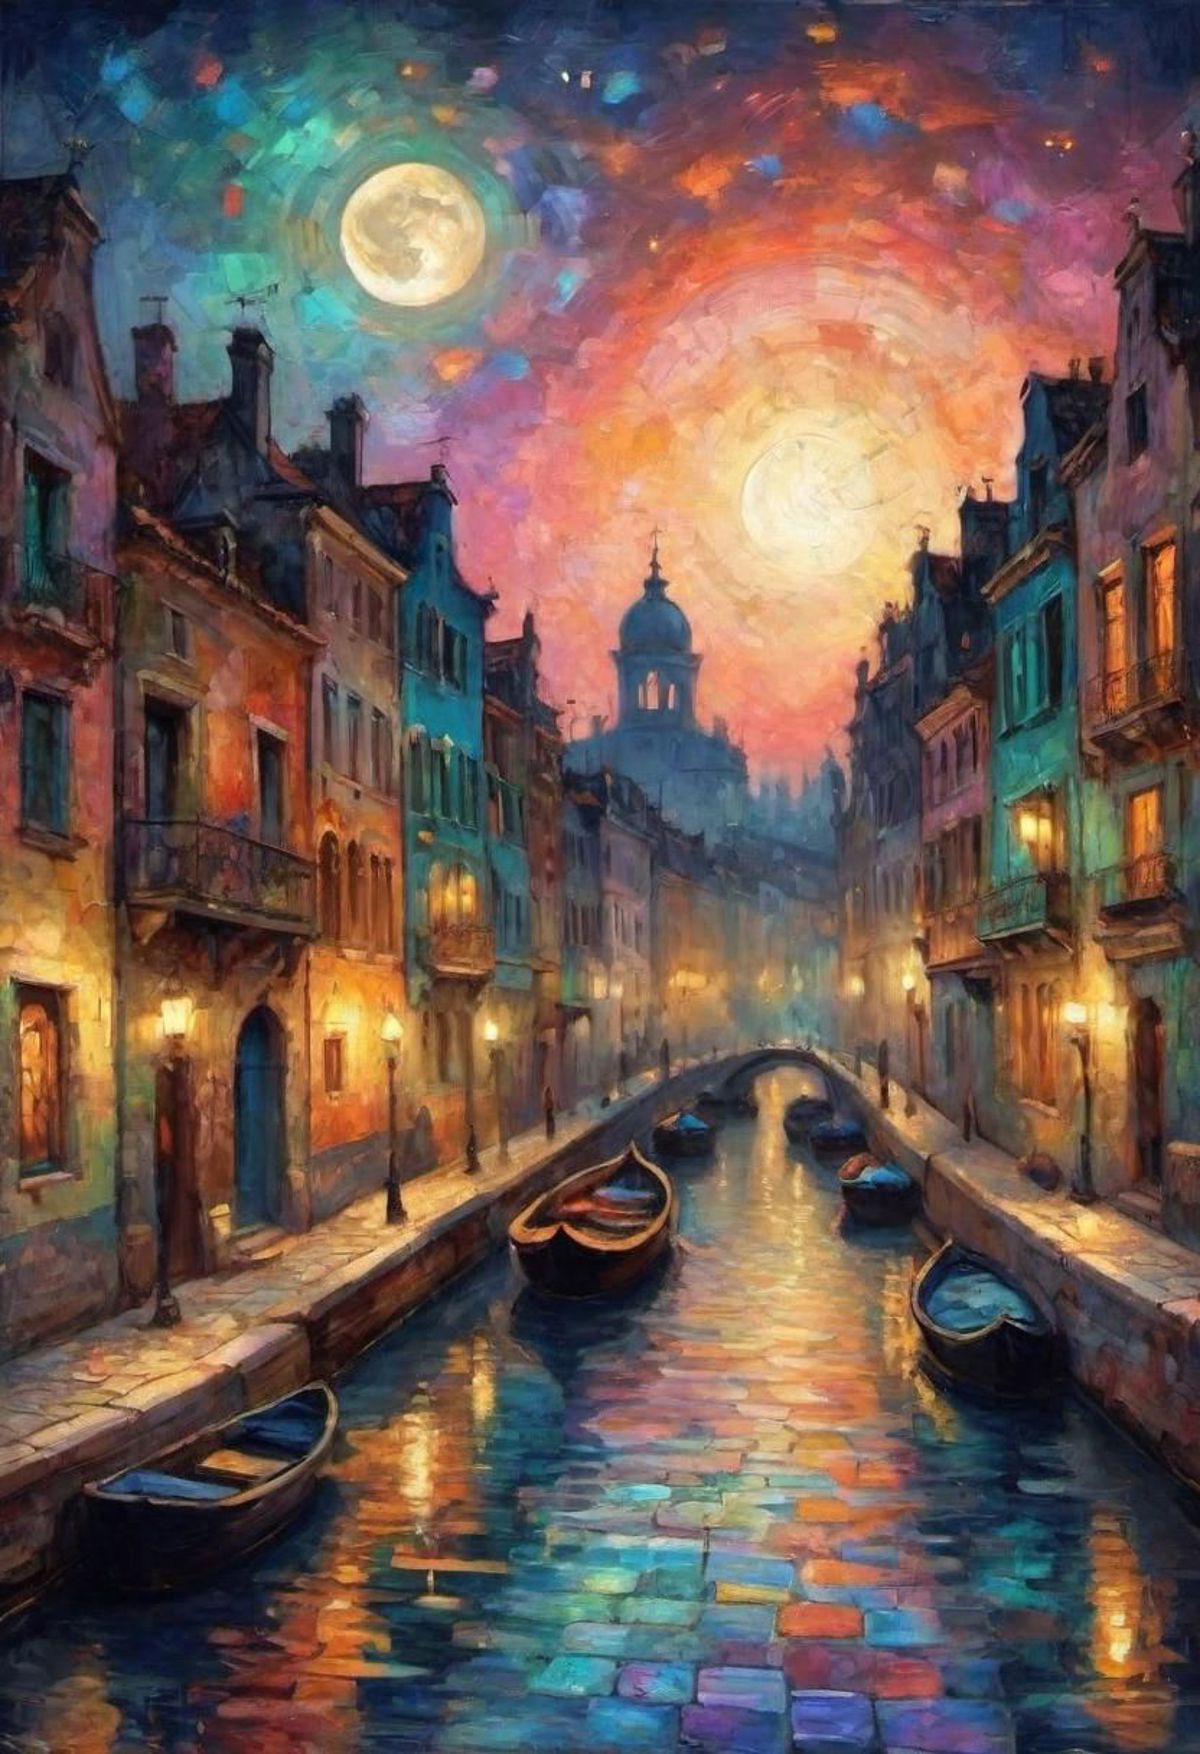 A picturesque painting of a canal with gondolas at night, featuring a moonlit sky and illuminated buildings.